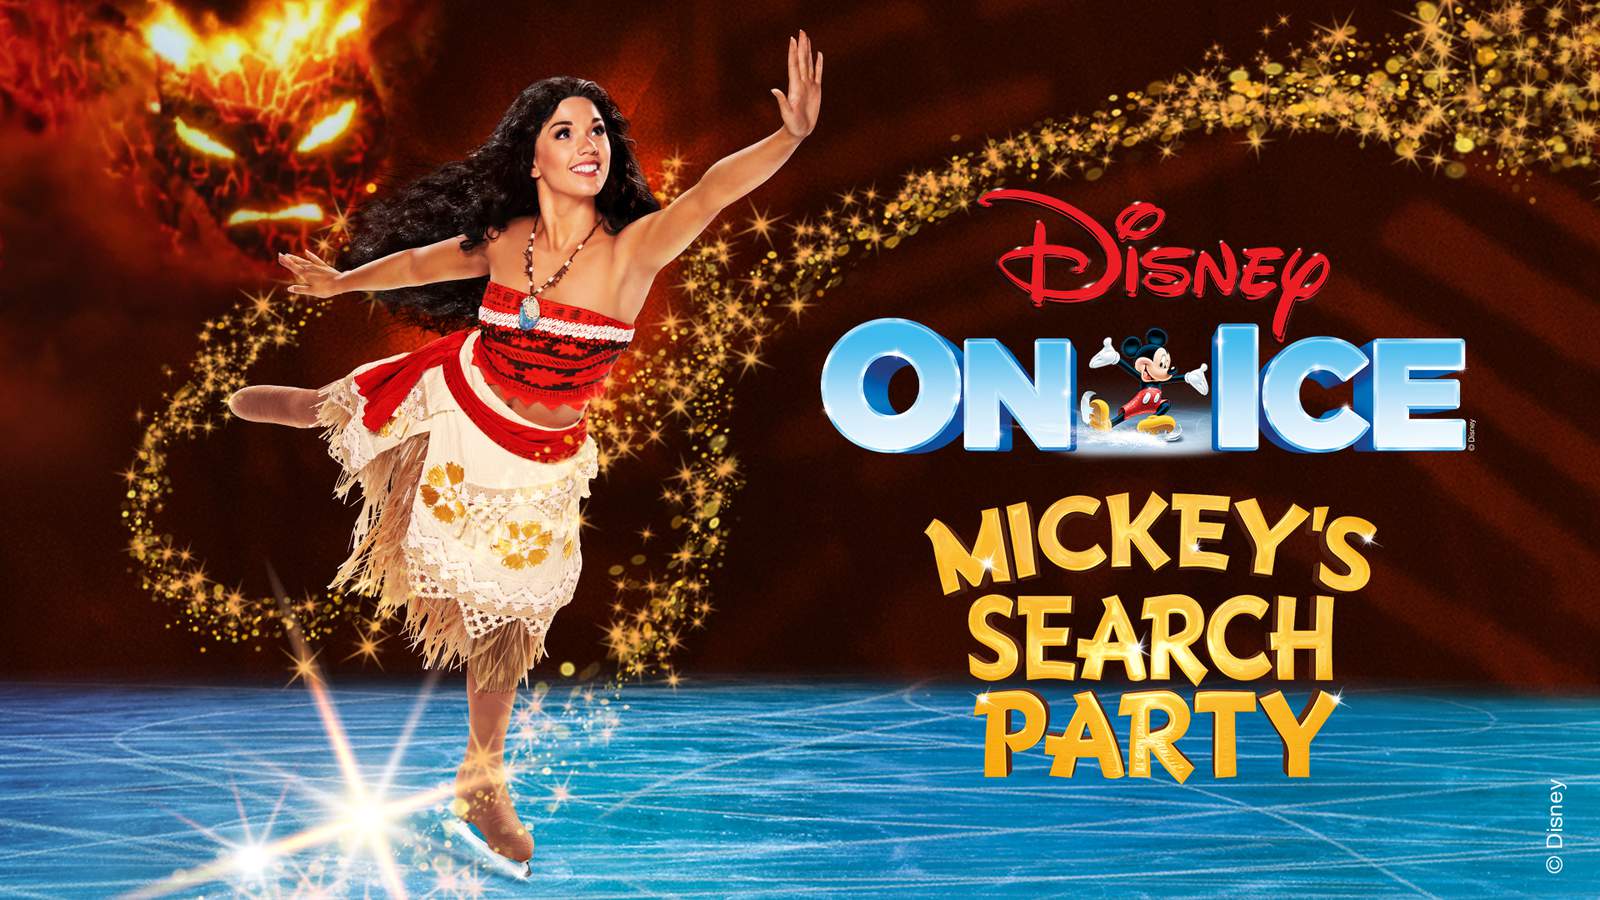 Your favorite Disney characters return to Houston for Disney On Ice ‘Mickey’s Search Party’